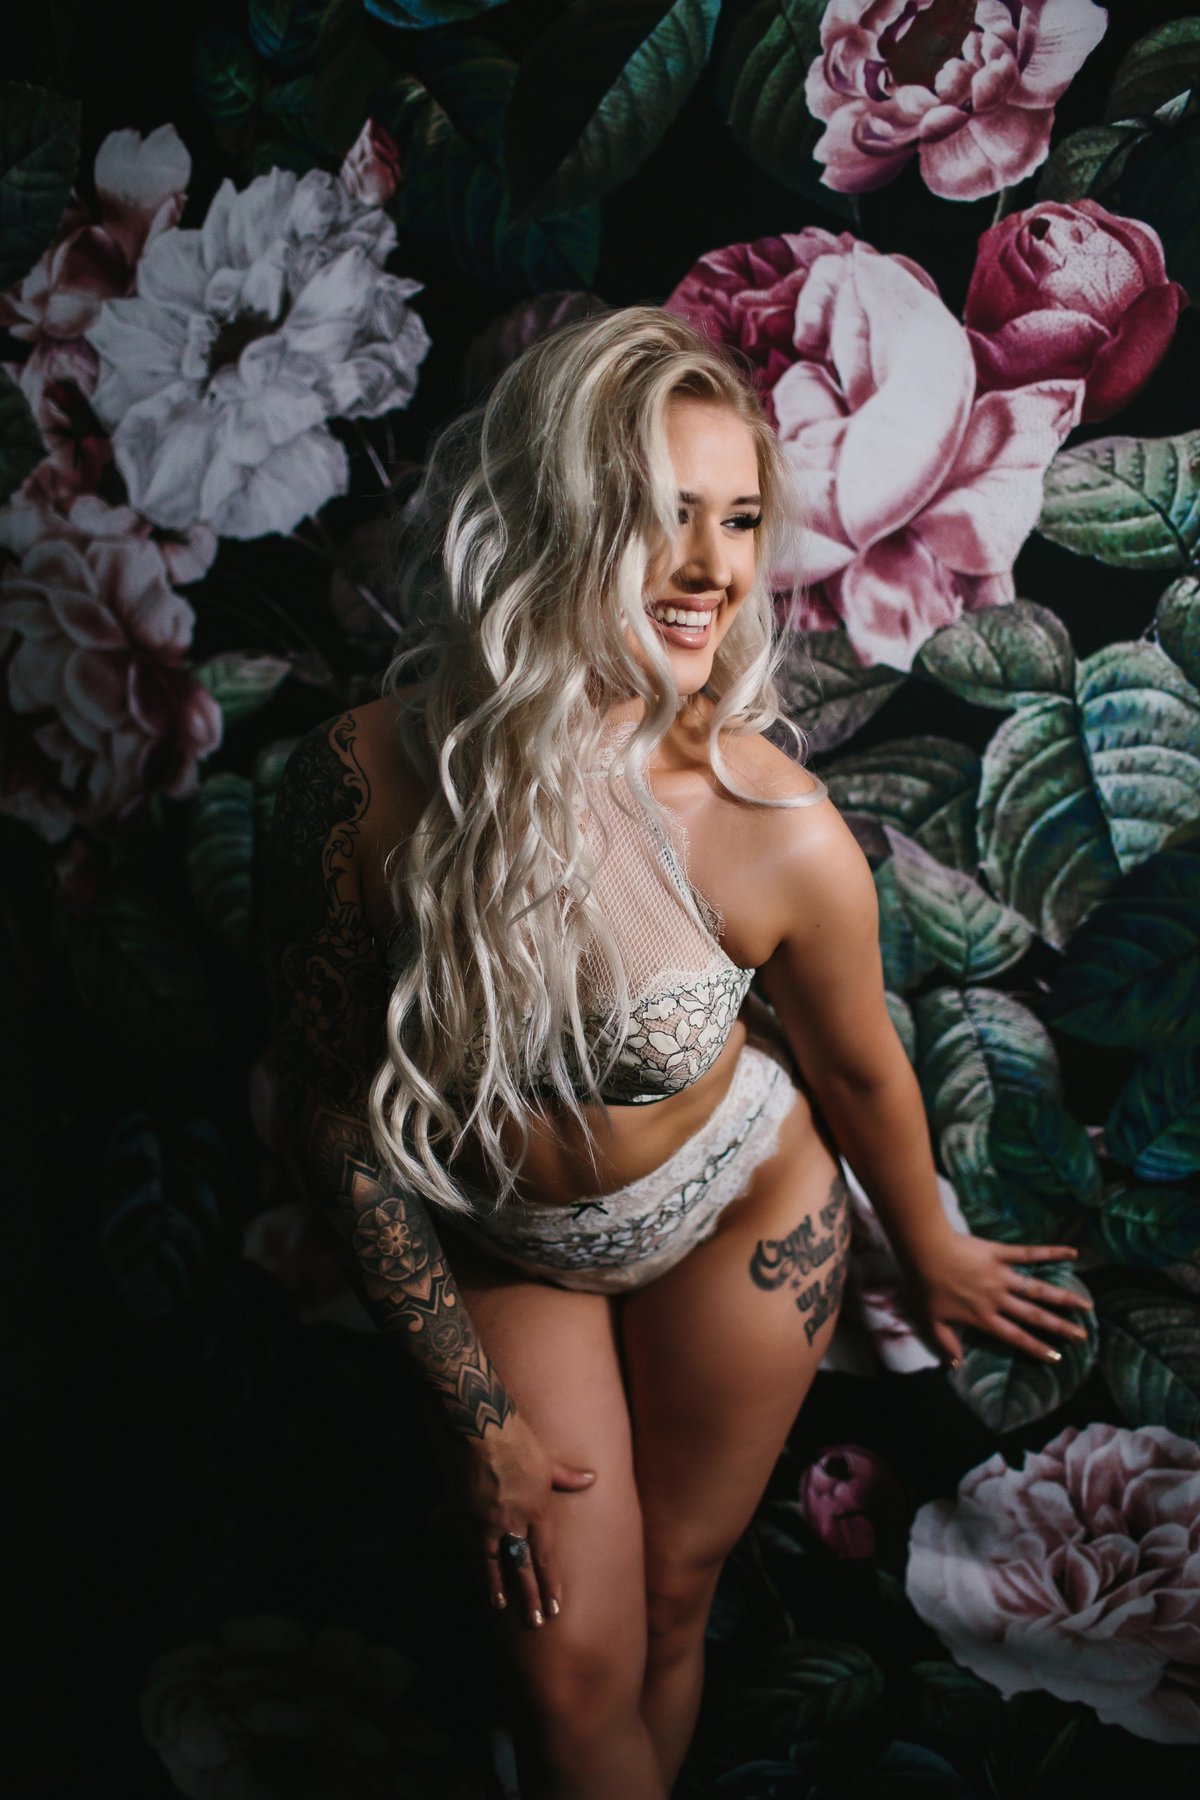 Blonde woman in white lace lingerie set posing against floral backdrop